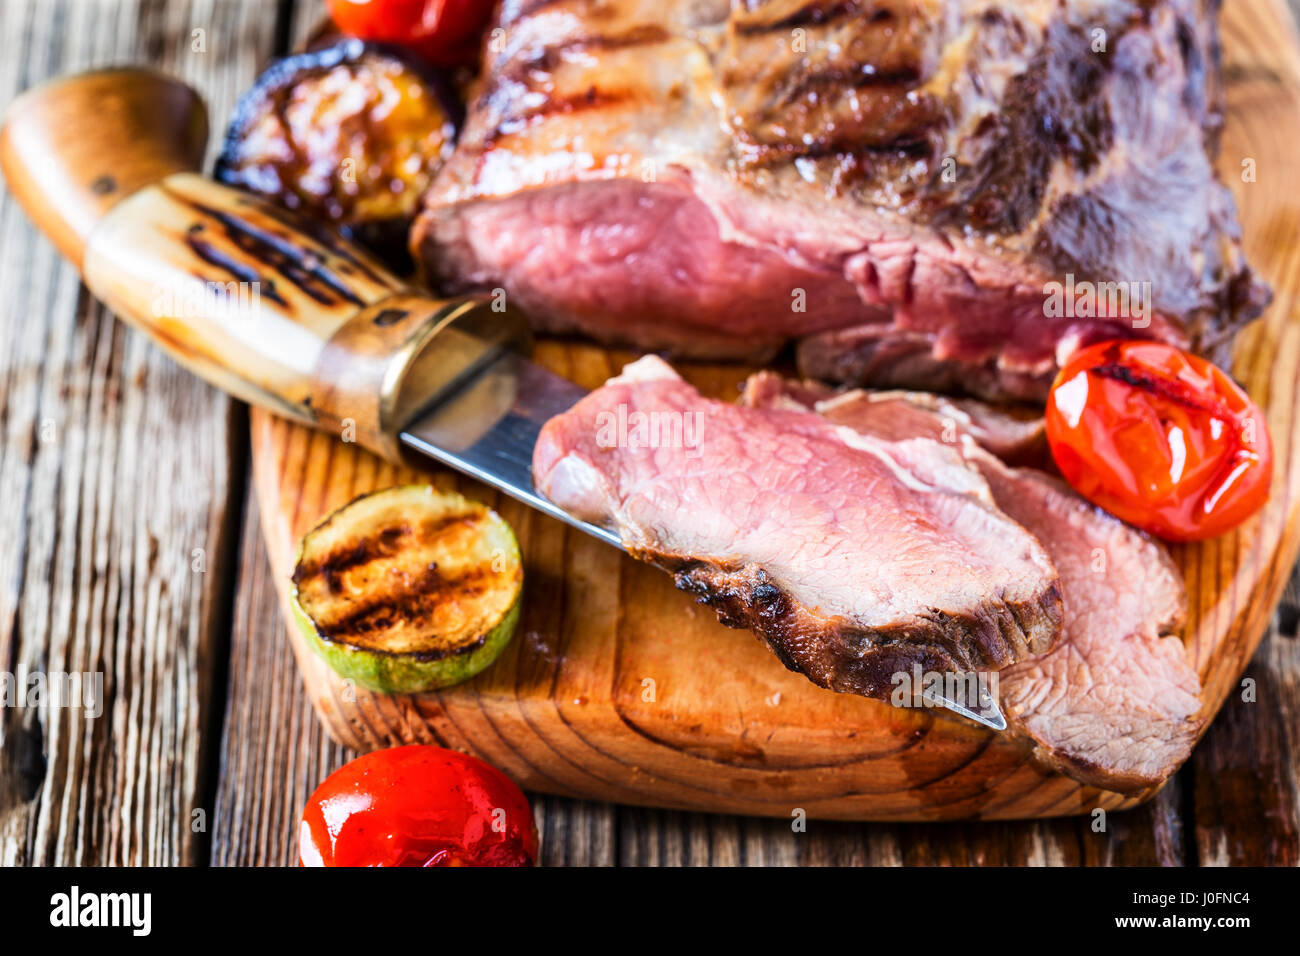 Rare roast sirloin of beef with roasted vegetables on rustic wooden background Stock Photo